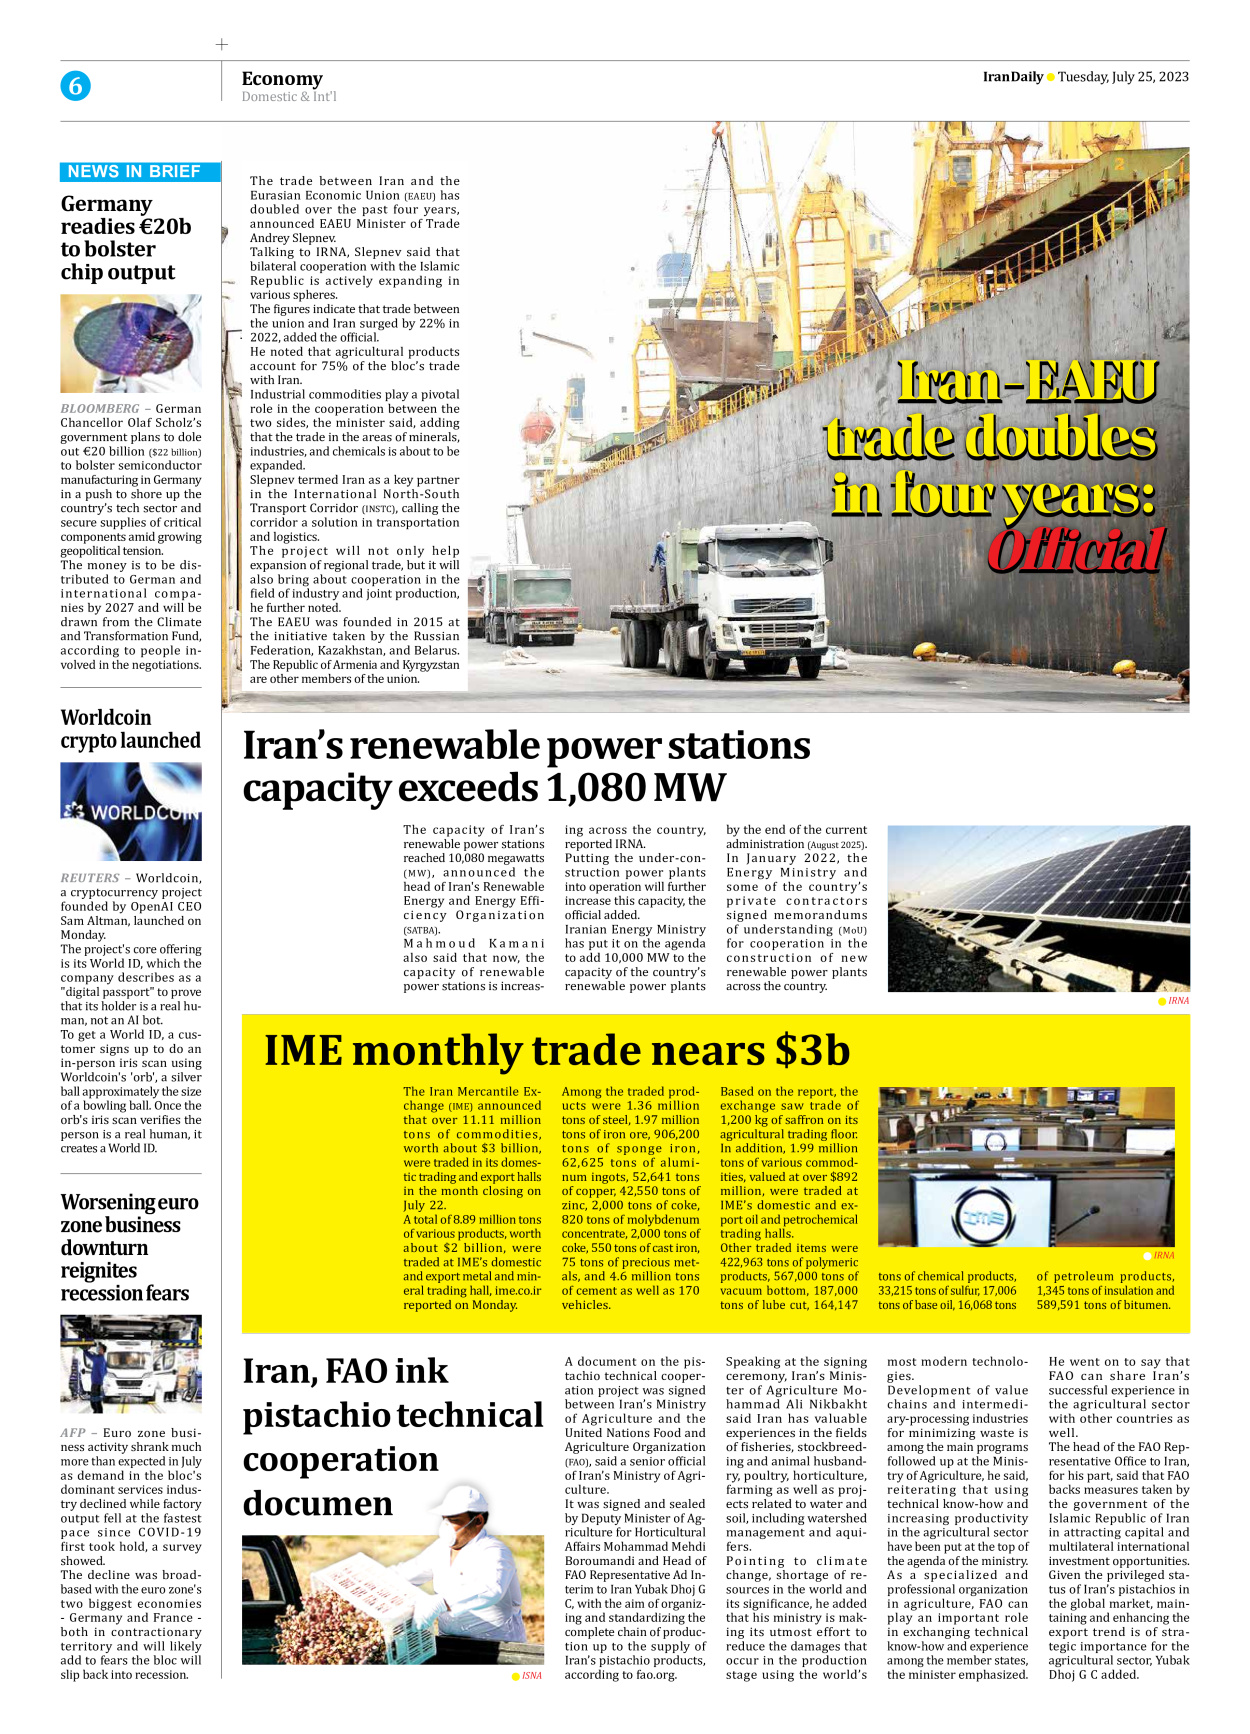 Iran Daily - Number Seven Thousand Three Hundred and Forty Eight - 25 July 2023 - Page 6